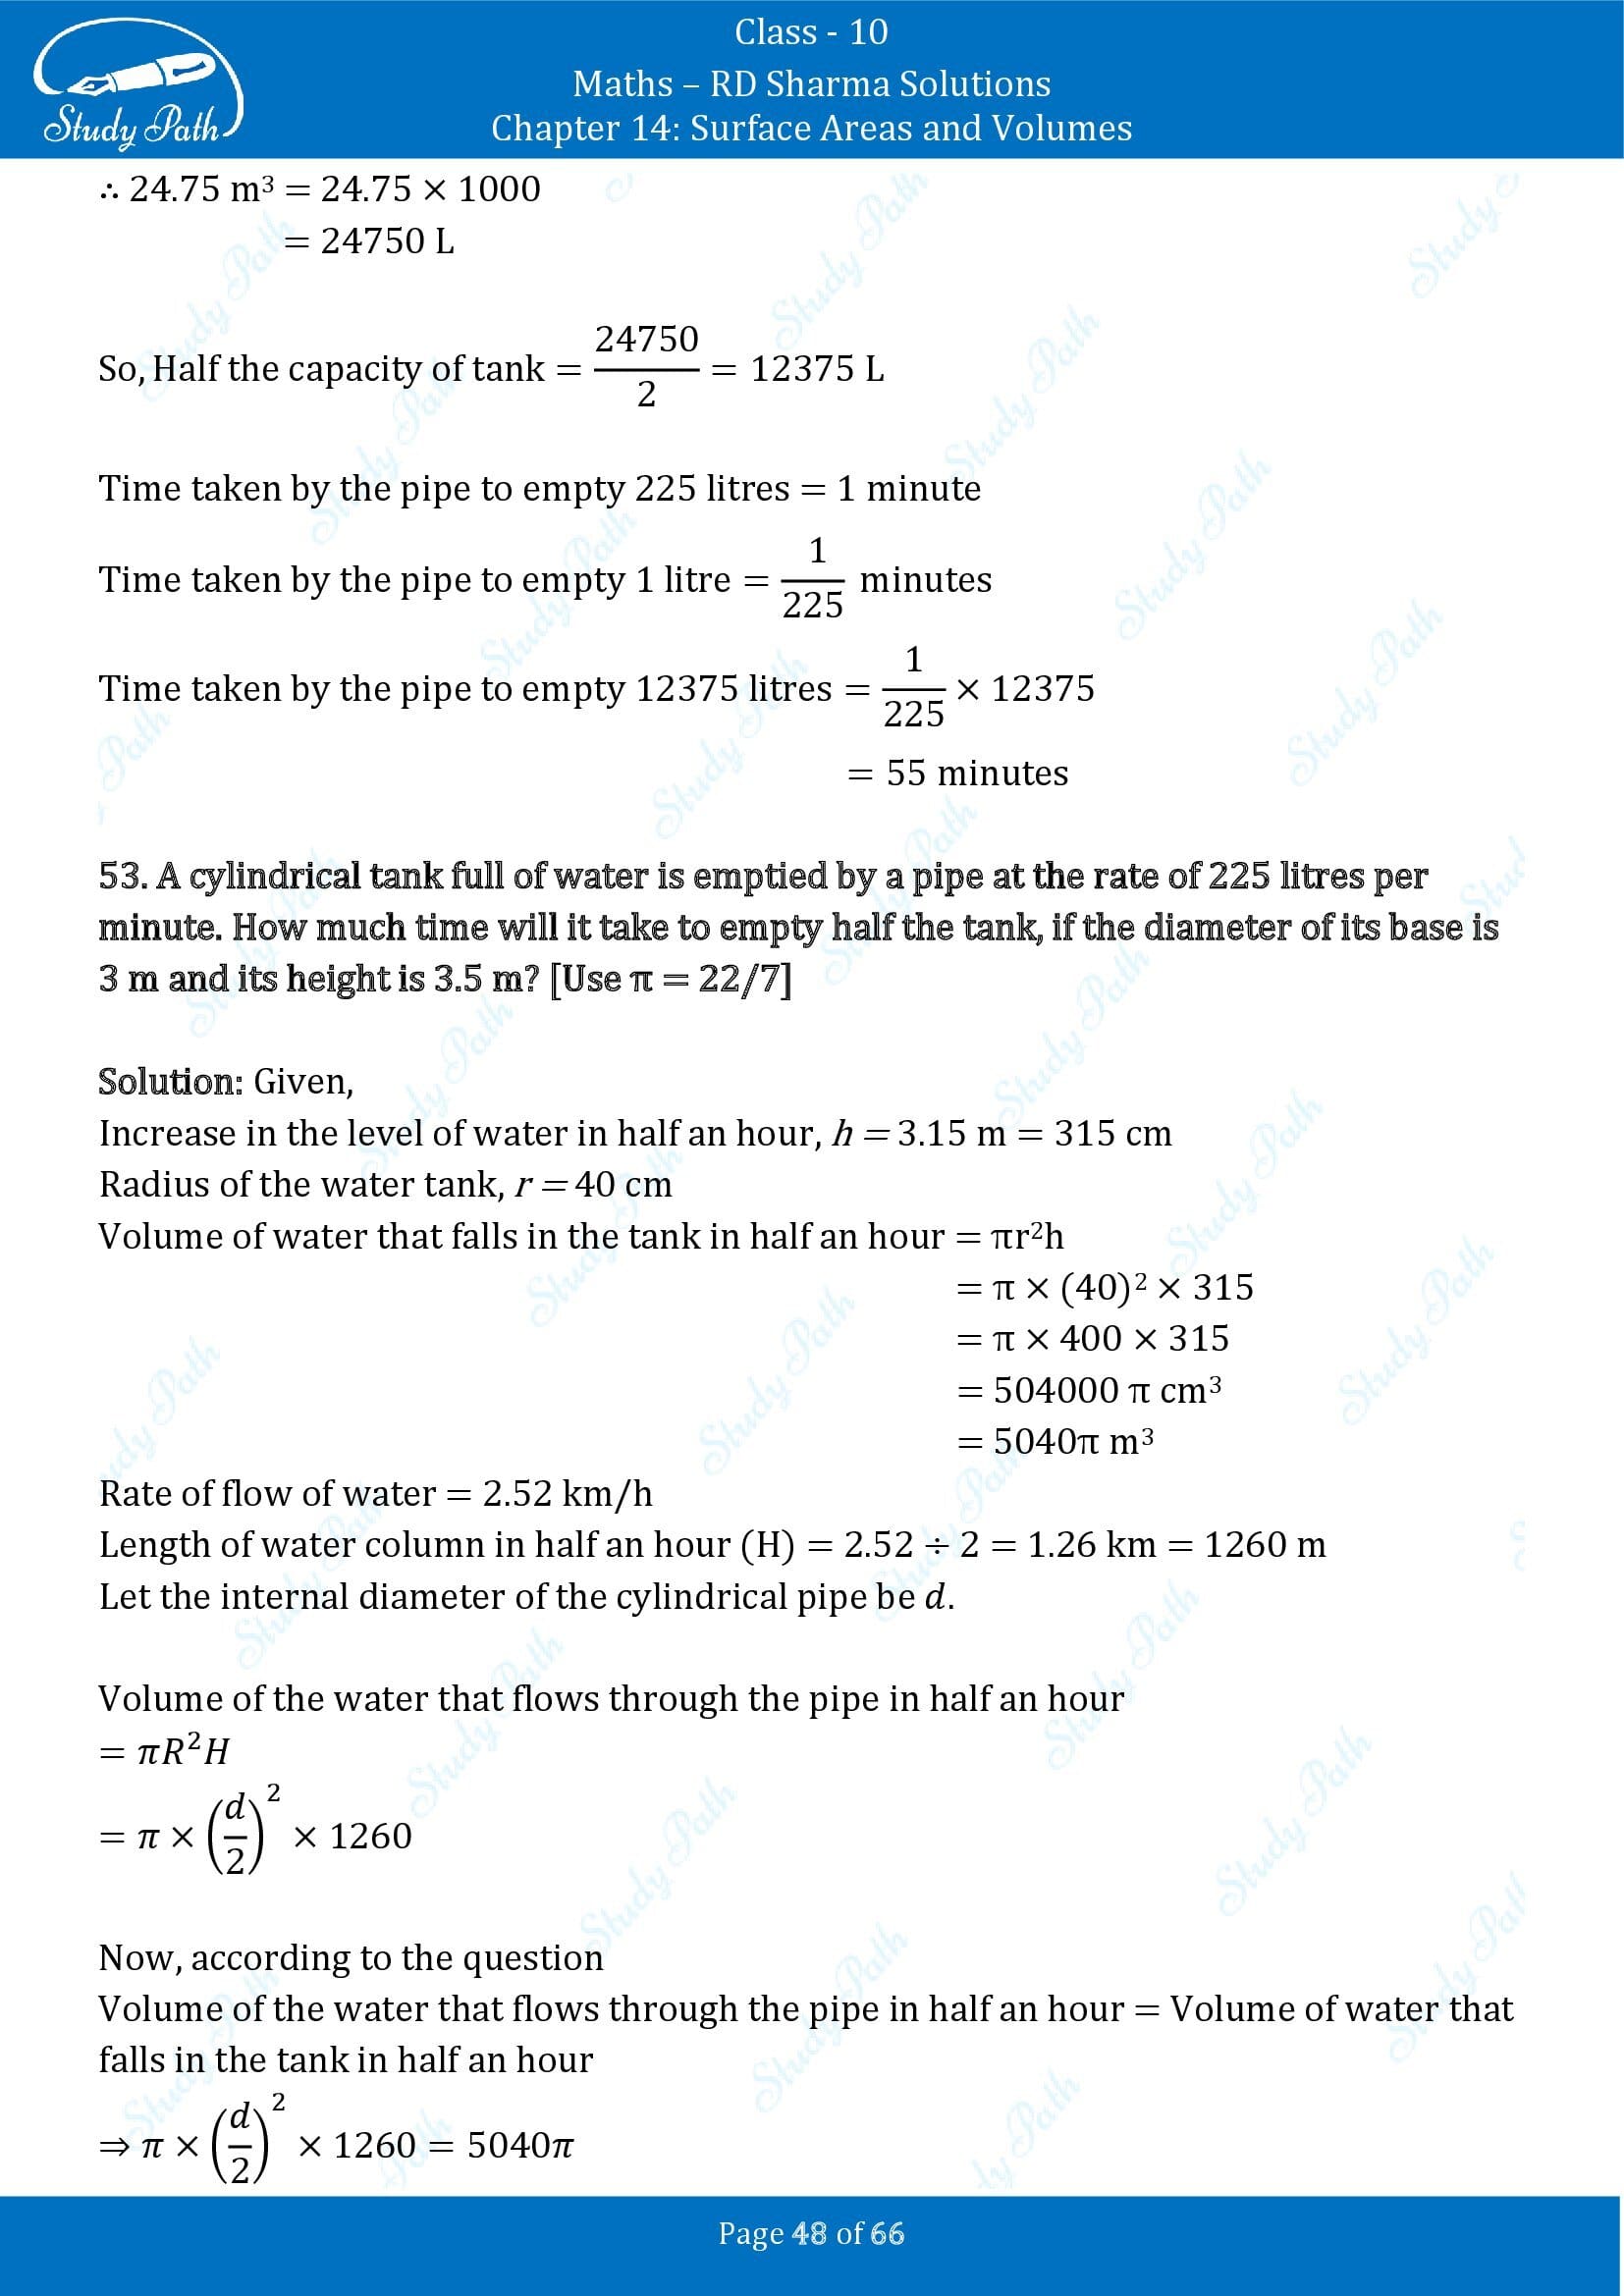 RD Sharma Solutions Class 10 Chapter 14 Surface Areas and Volumes Exercise 14.1 00048